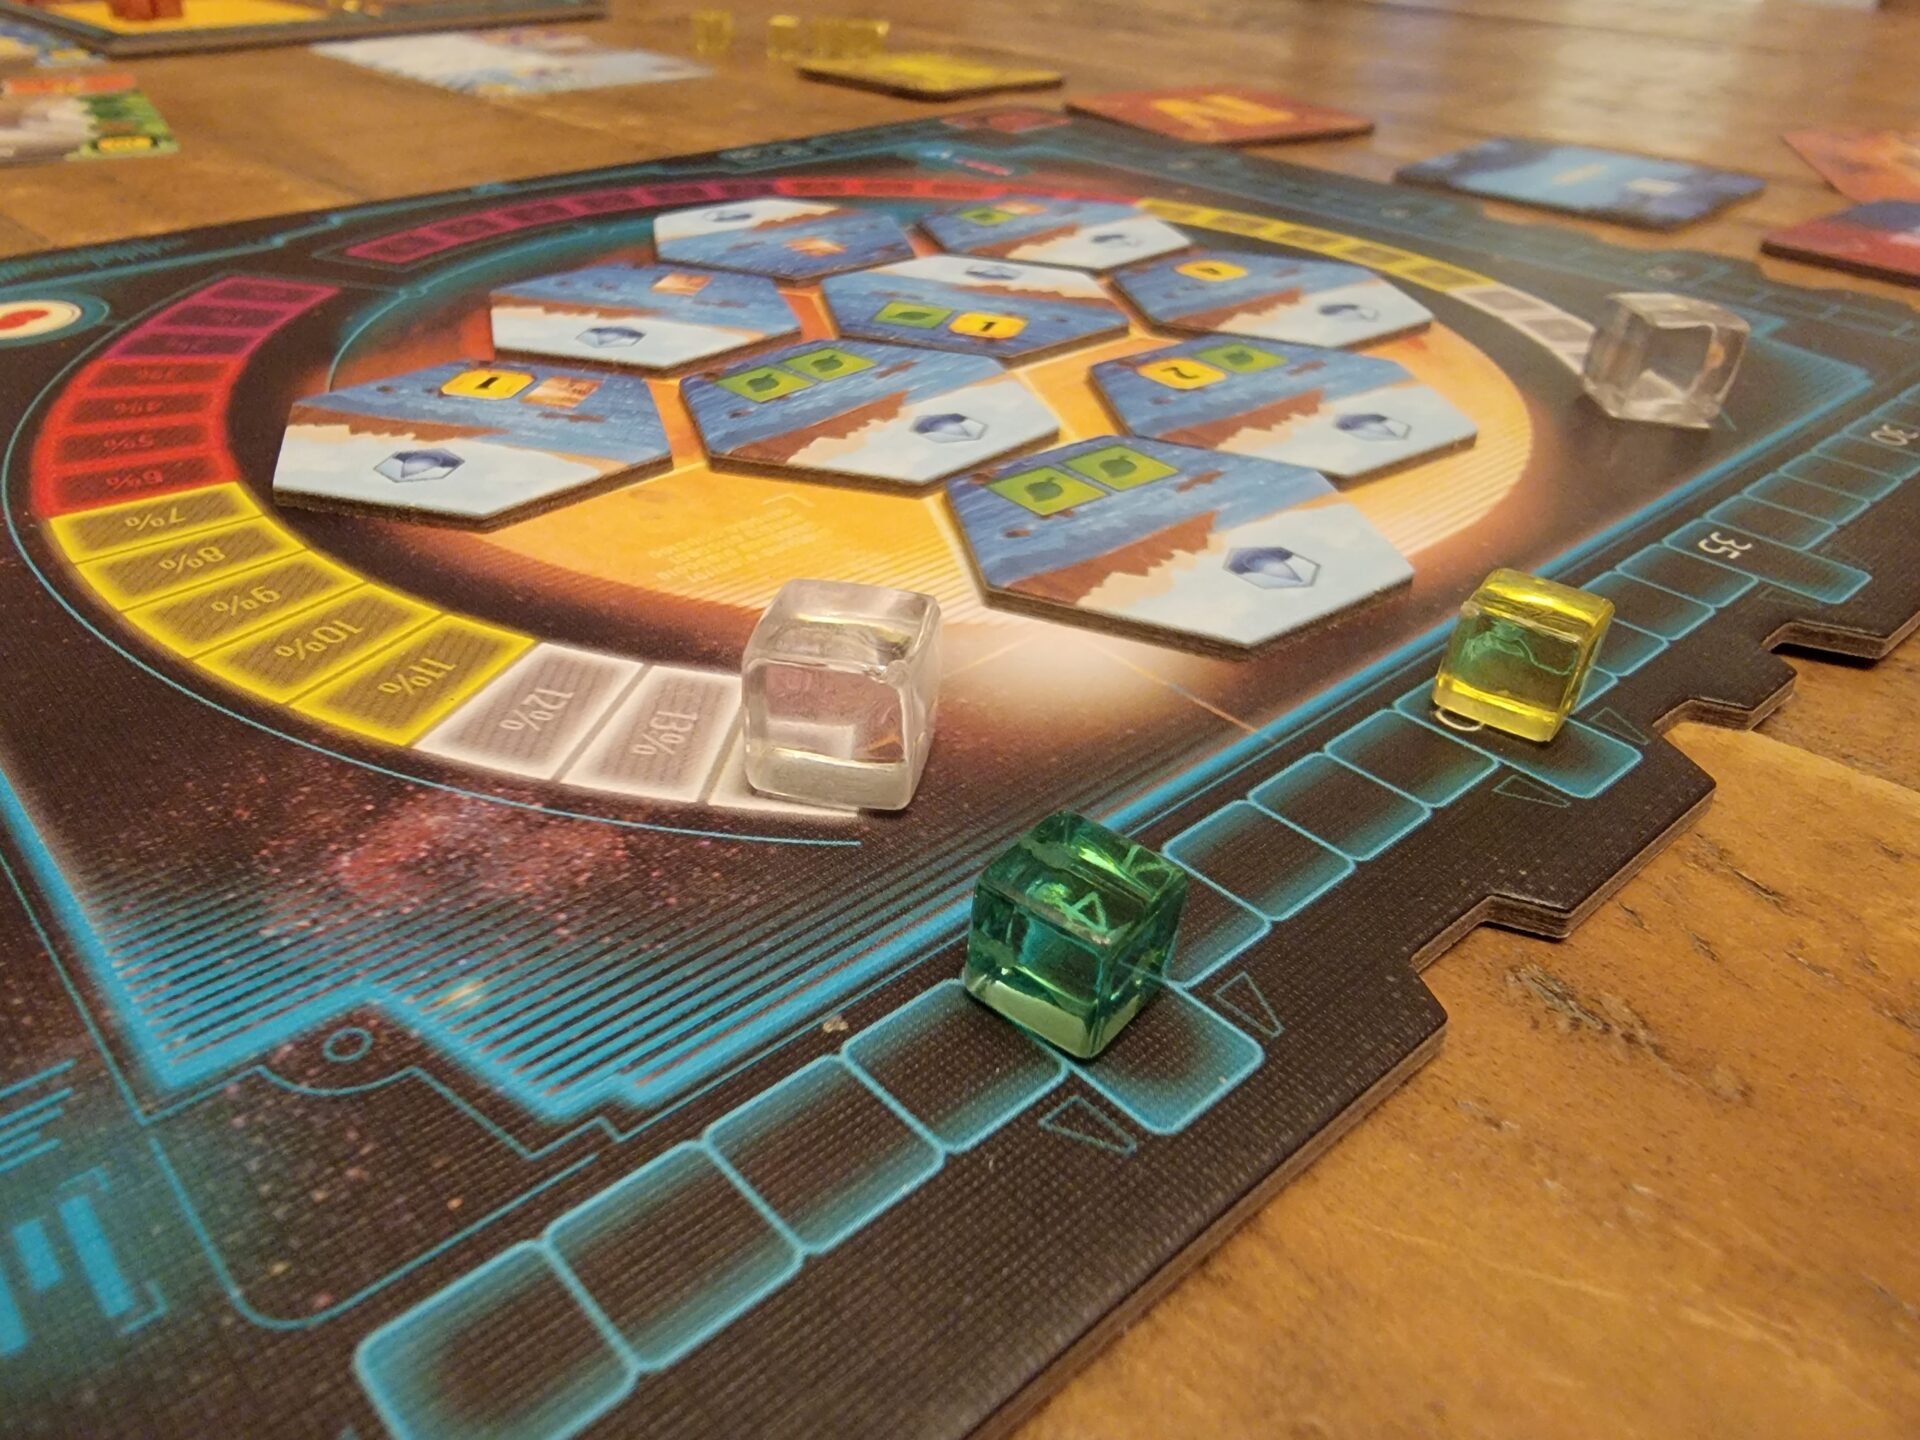 Terraforming Mars Ares Expedition board game on table